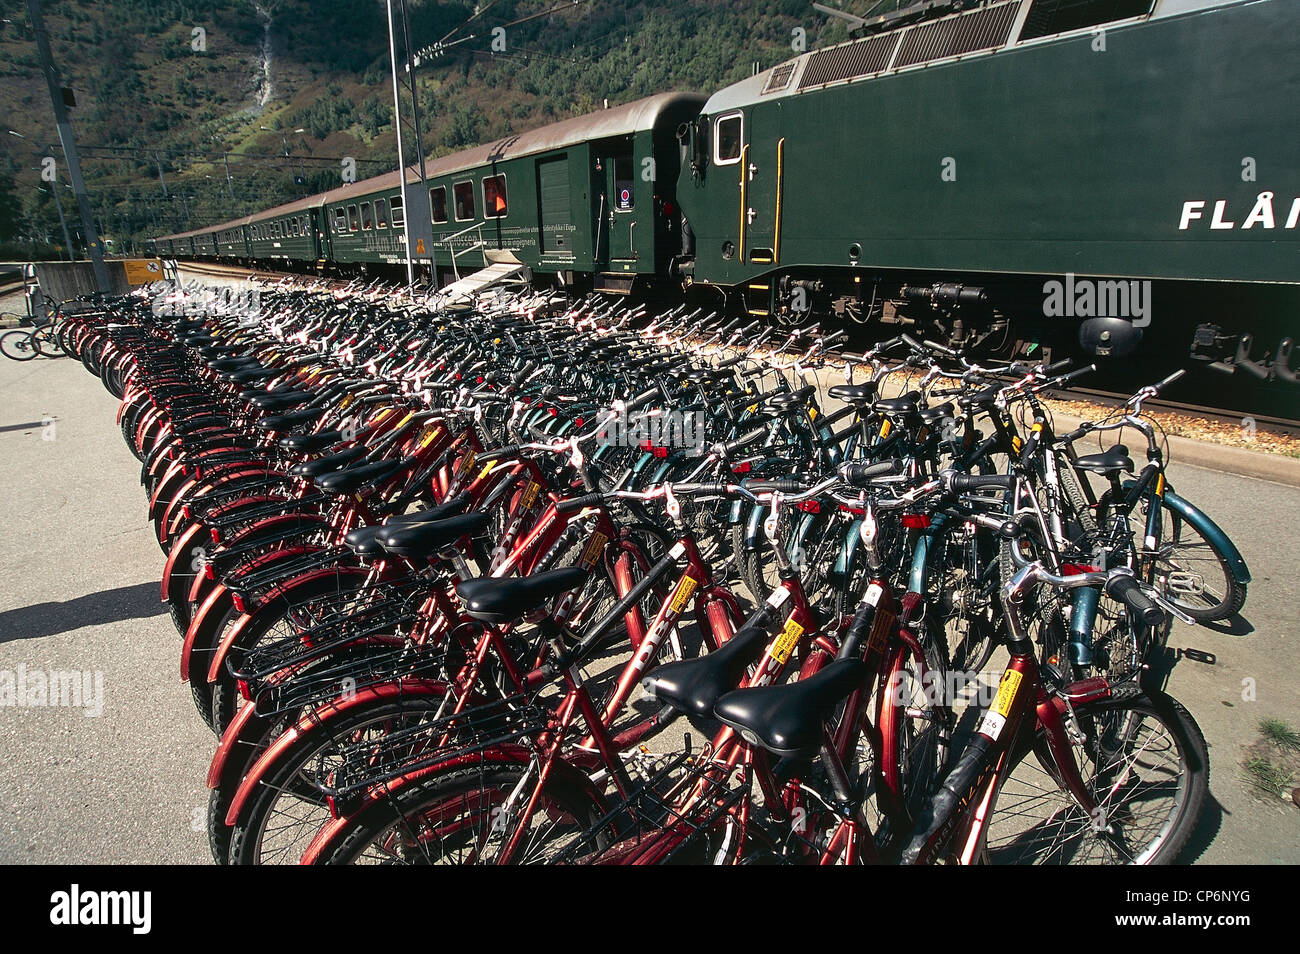 Norway - Sogn og Fjordane County - Fl?m - Bicycles parked at the station Fl?msbana (line from Myrdal to Fl?m) Stock Photo